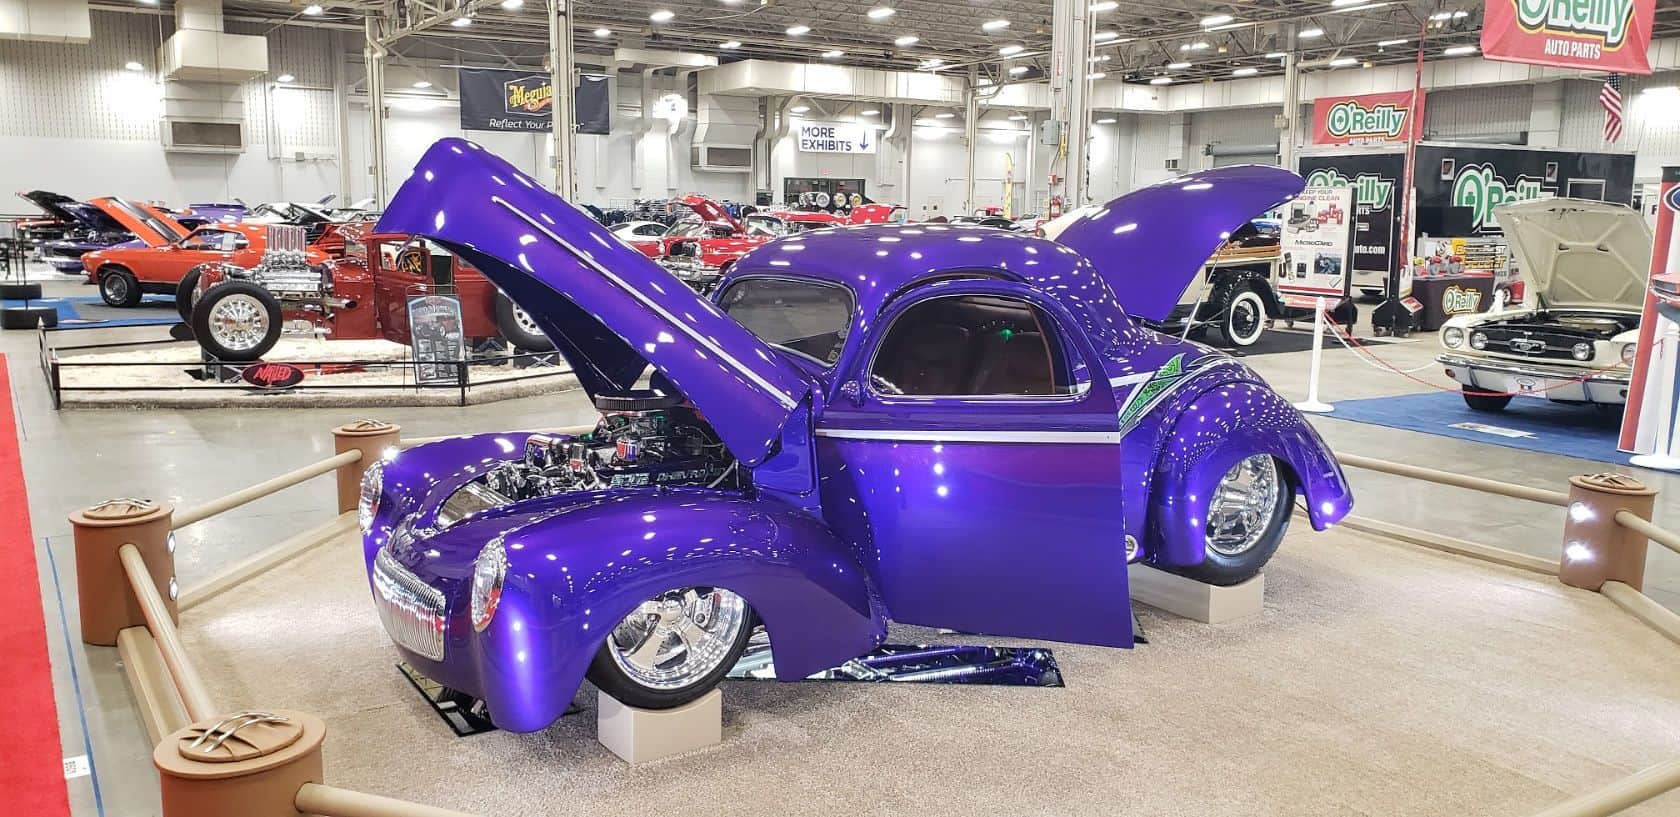 1941 willys